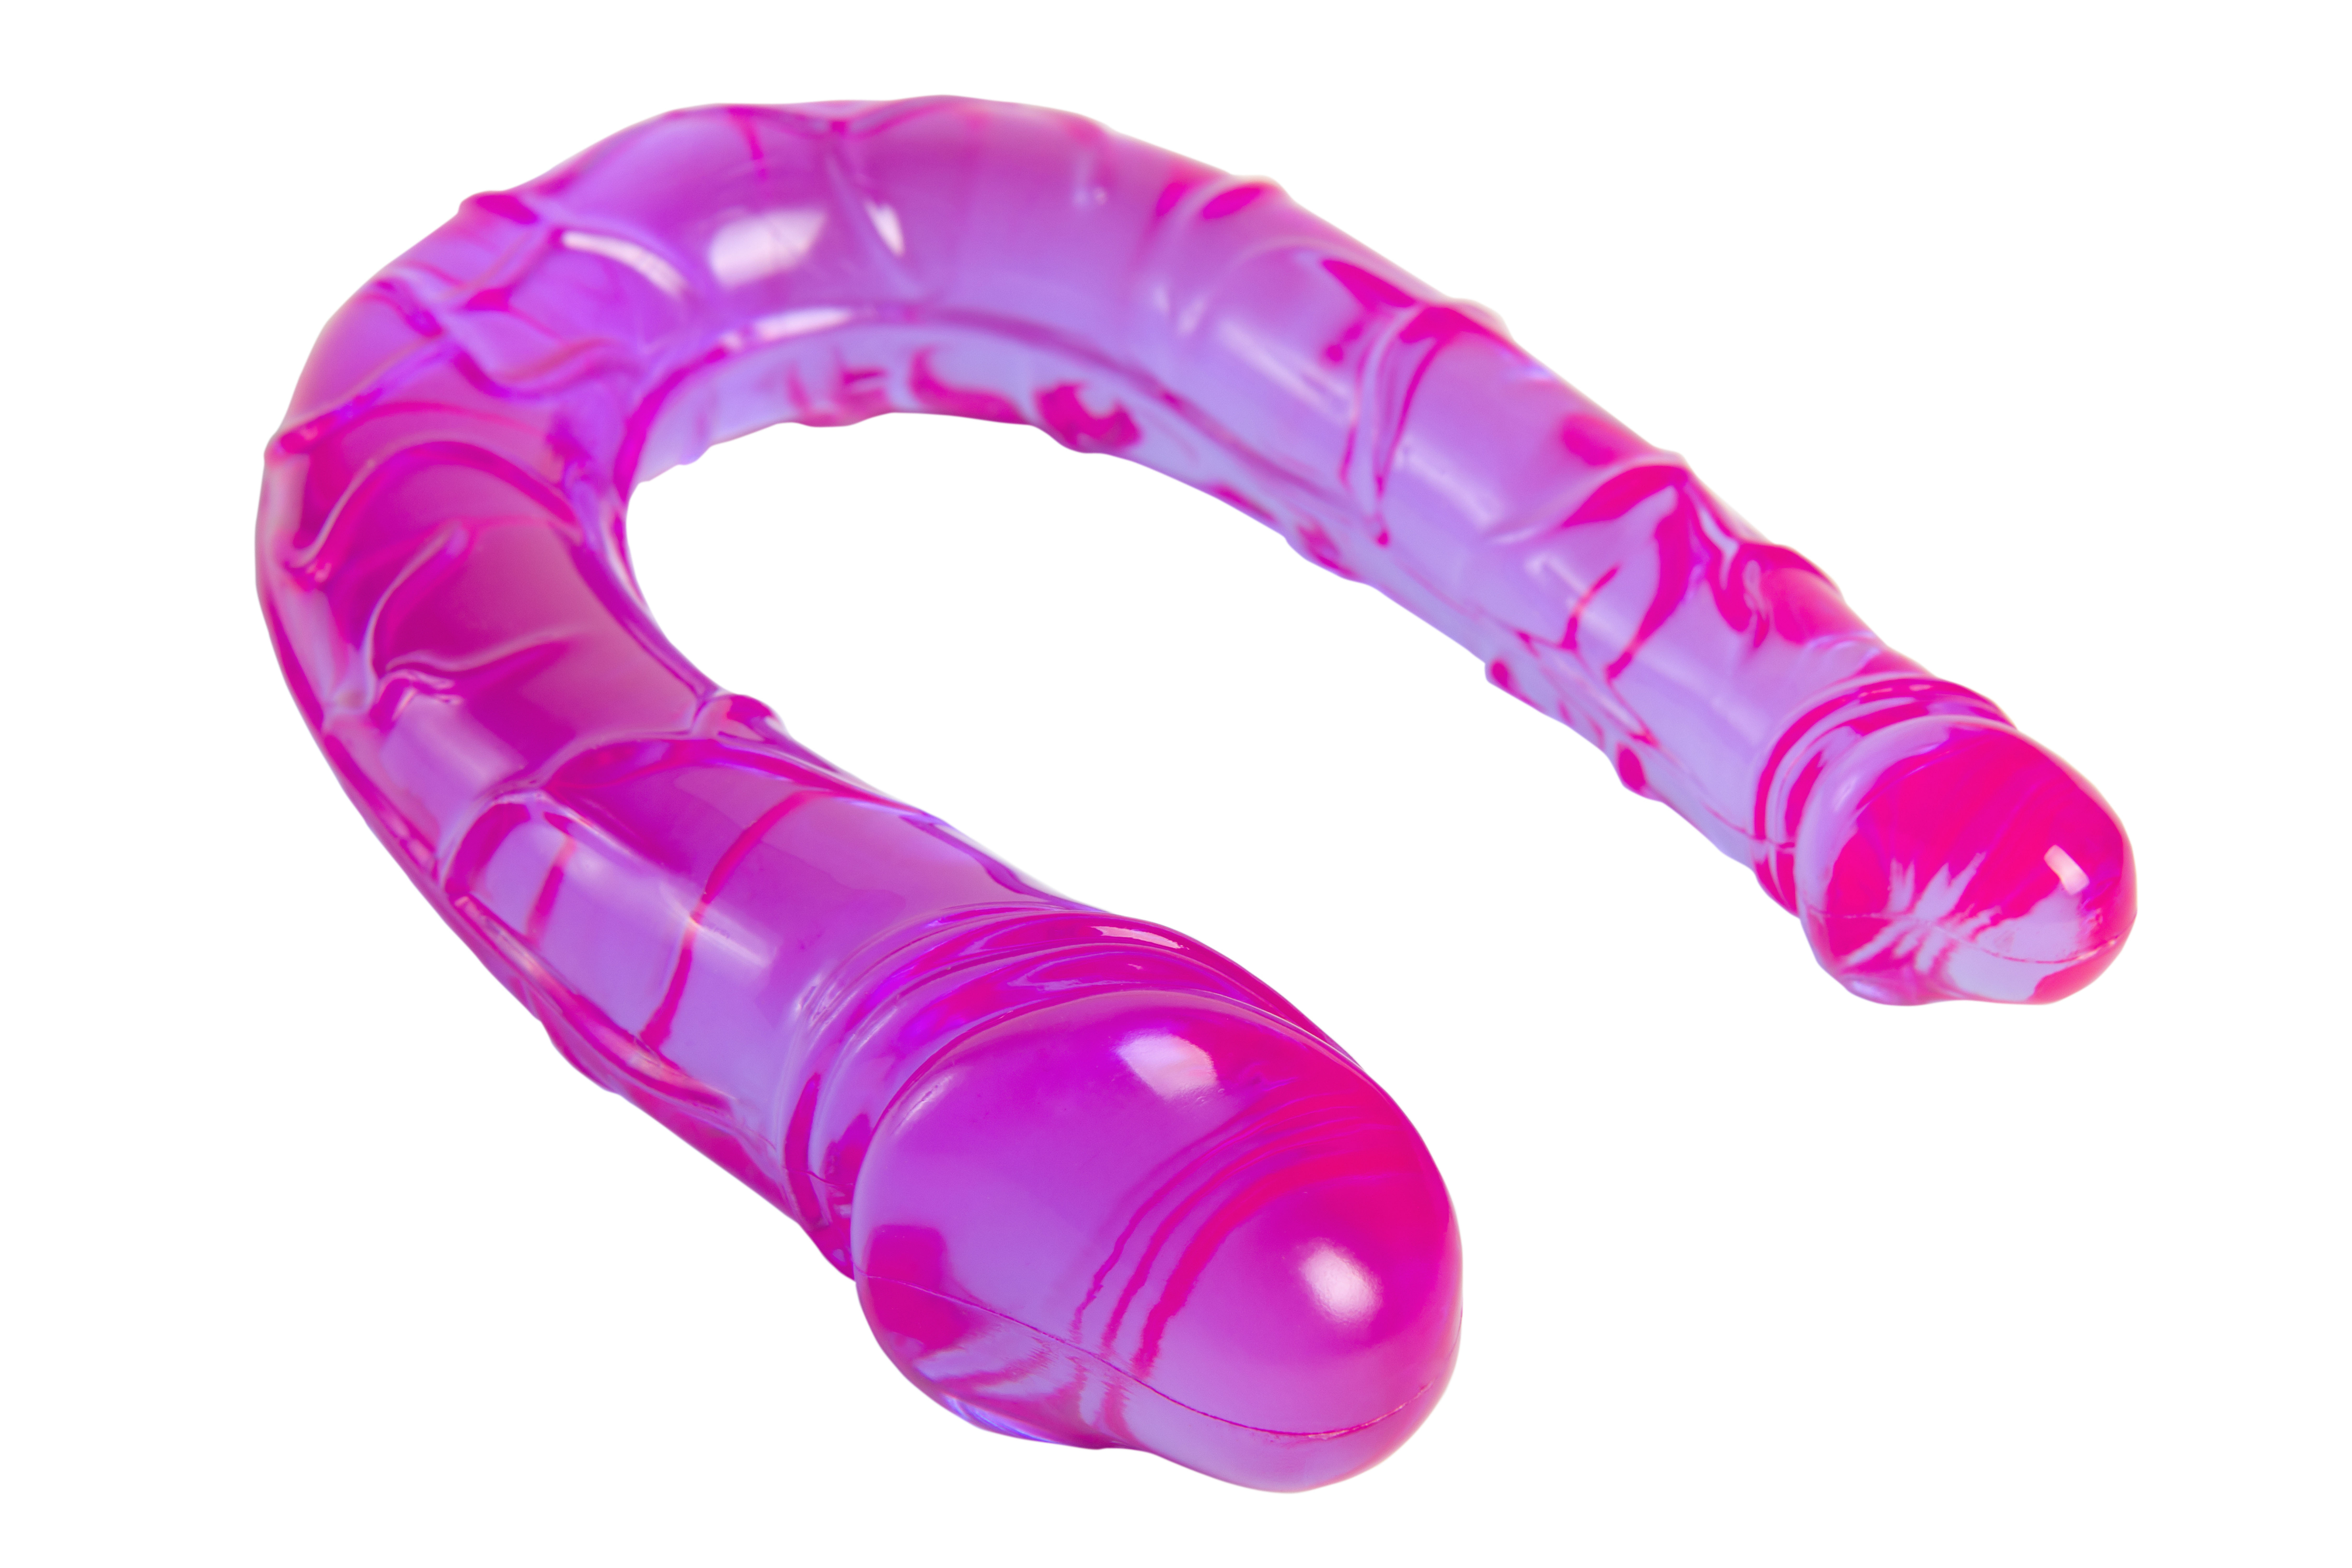 Toy double penetration